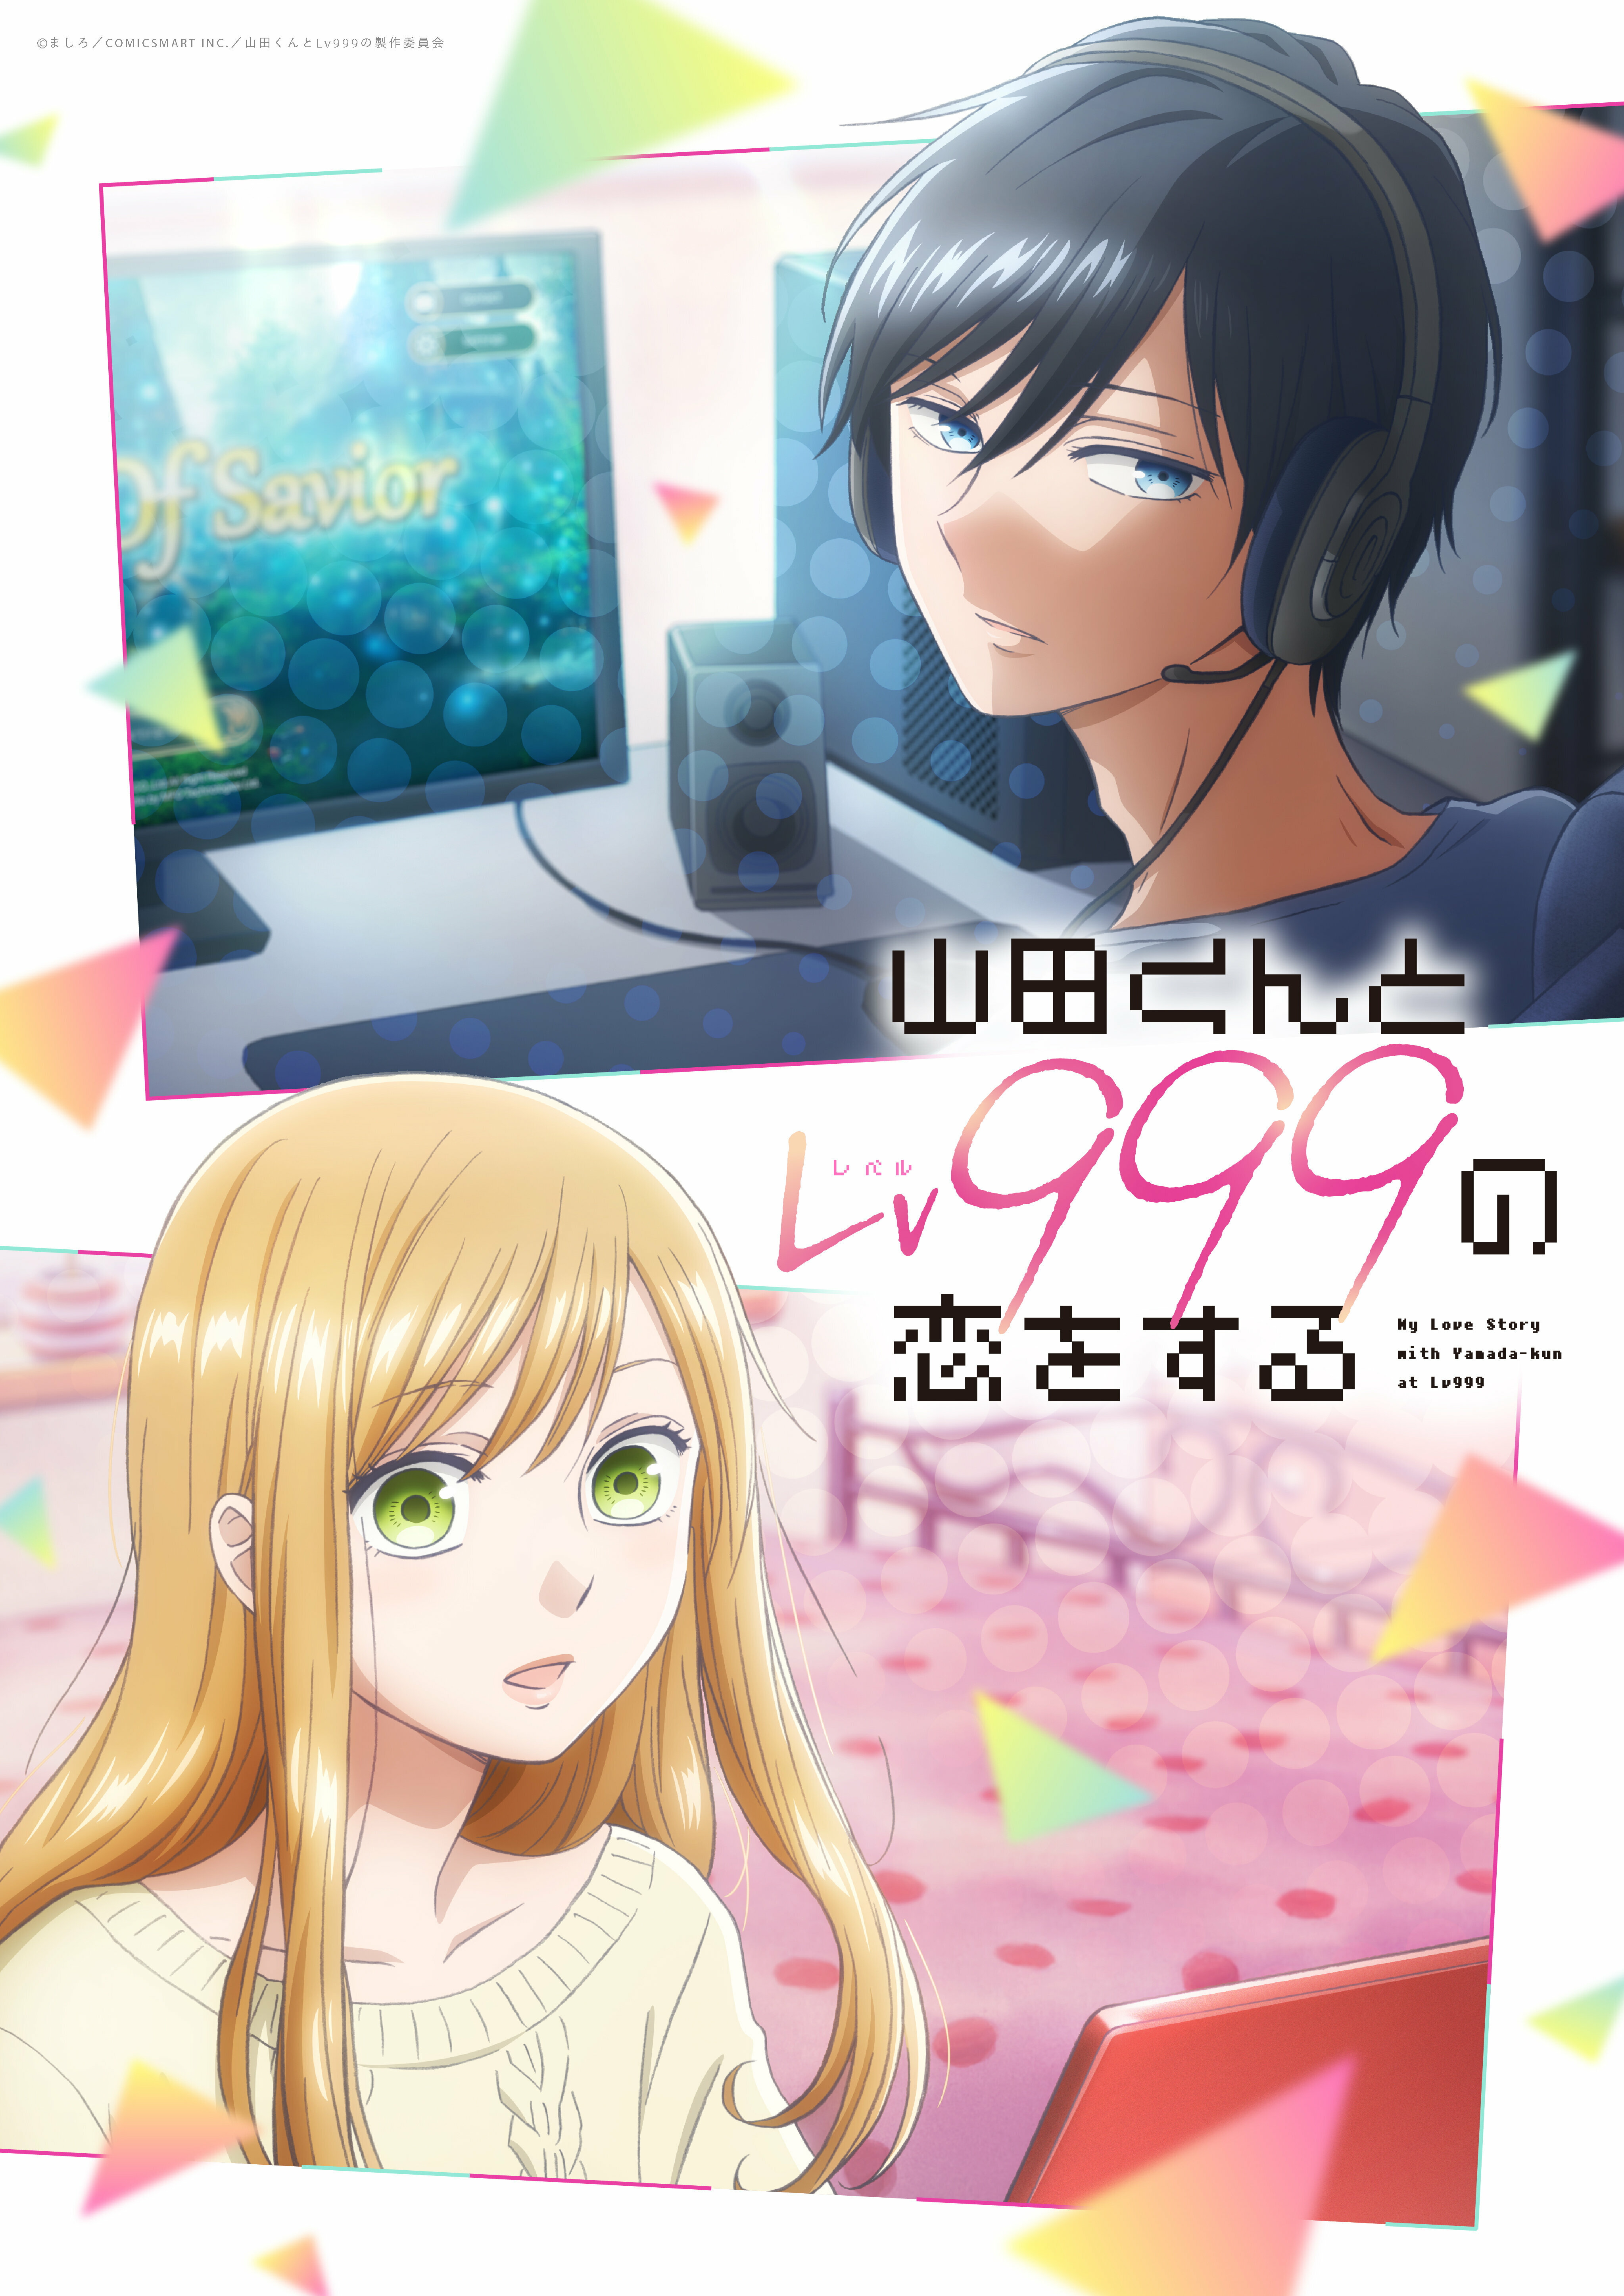 GANMA!'s popular title My Love Story with Yamada-kun at Lv999 to be made  into TV anime! Inori Minase and Koki Uchiyama are appointed as voice  actors｜COMICSMART｜Press Releases｜SEPTENI HOLDINGS CO., LTD.